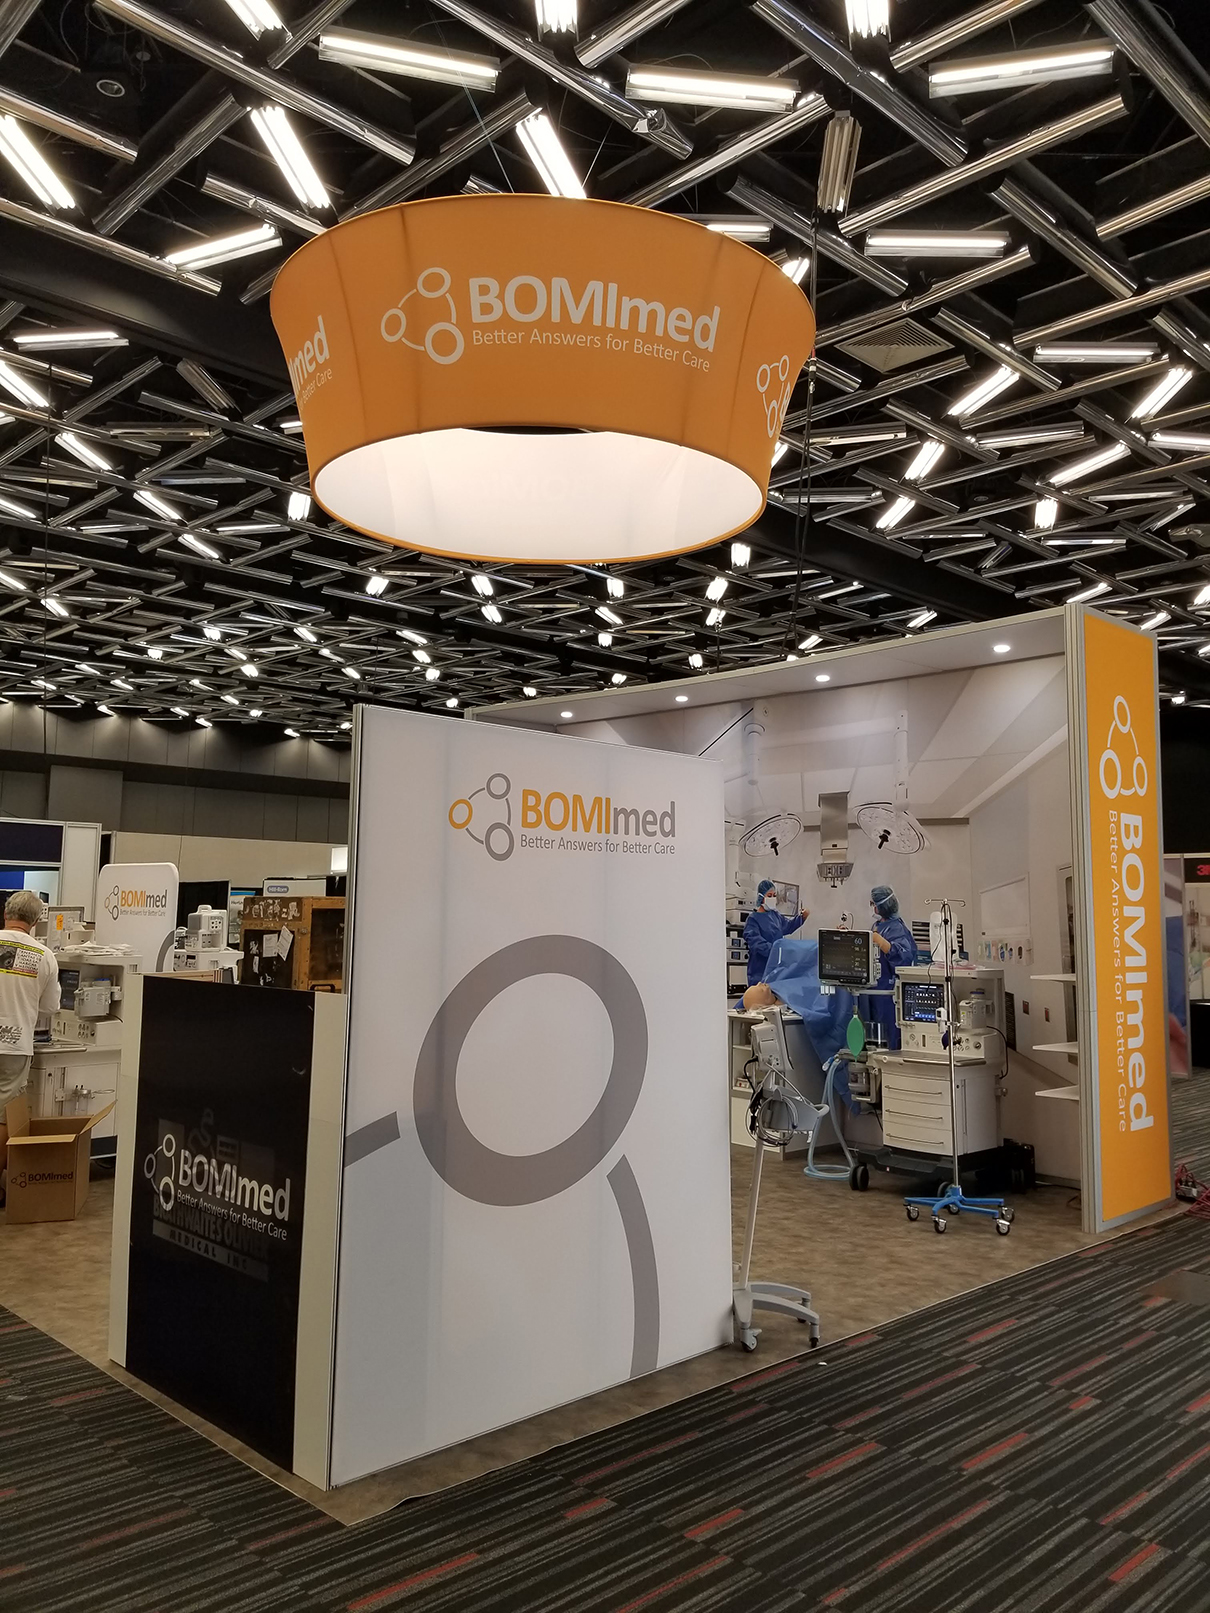 BOMImed tradeshow booth created by Bounce Design